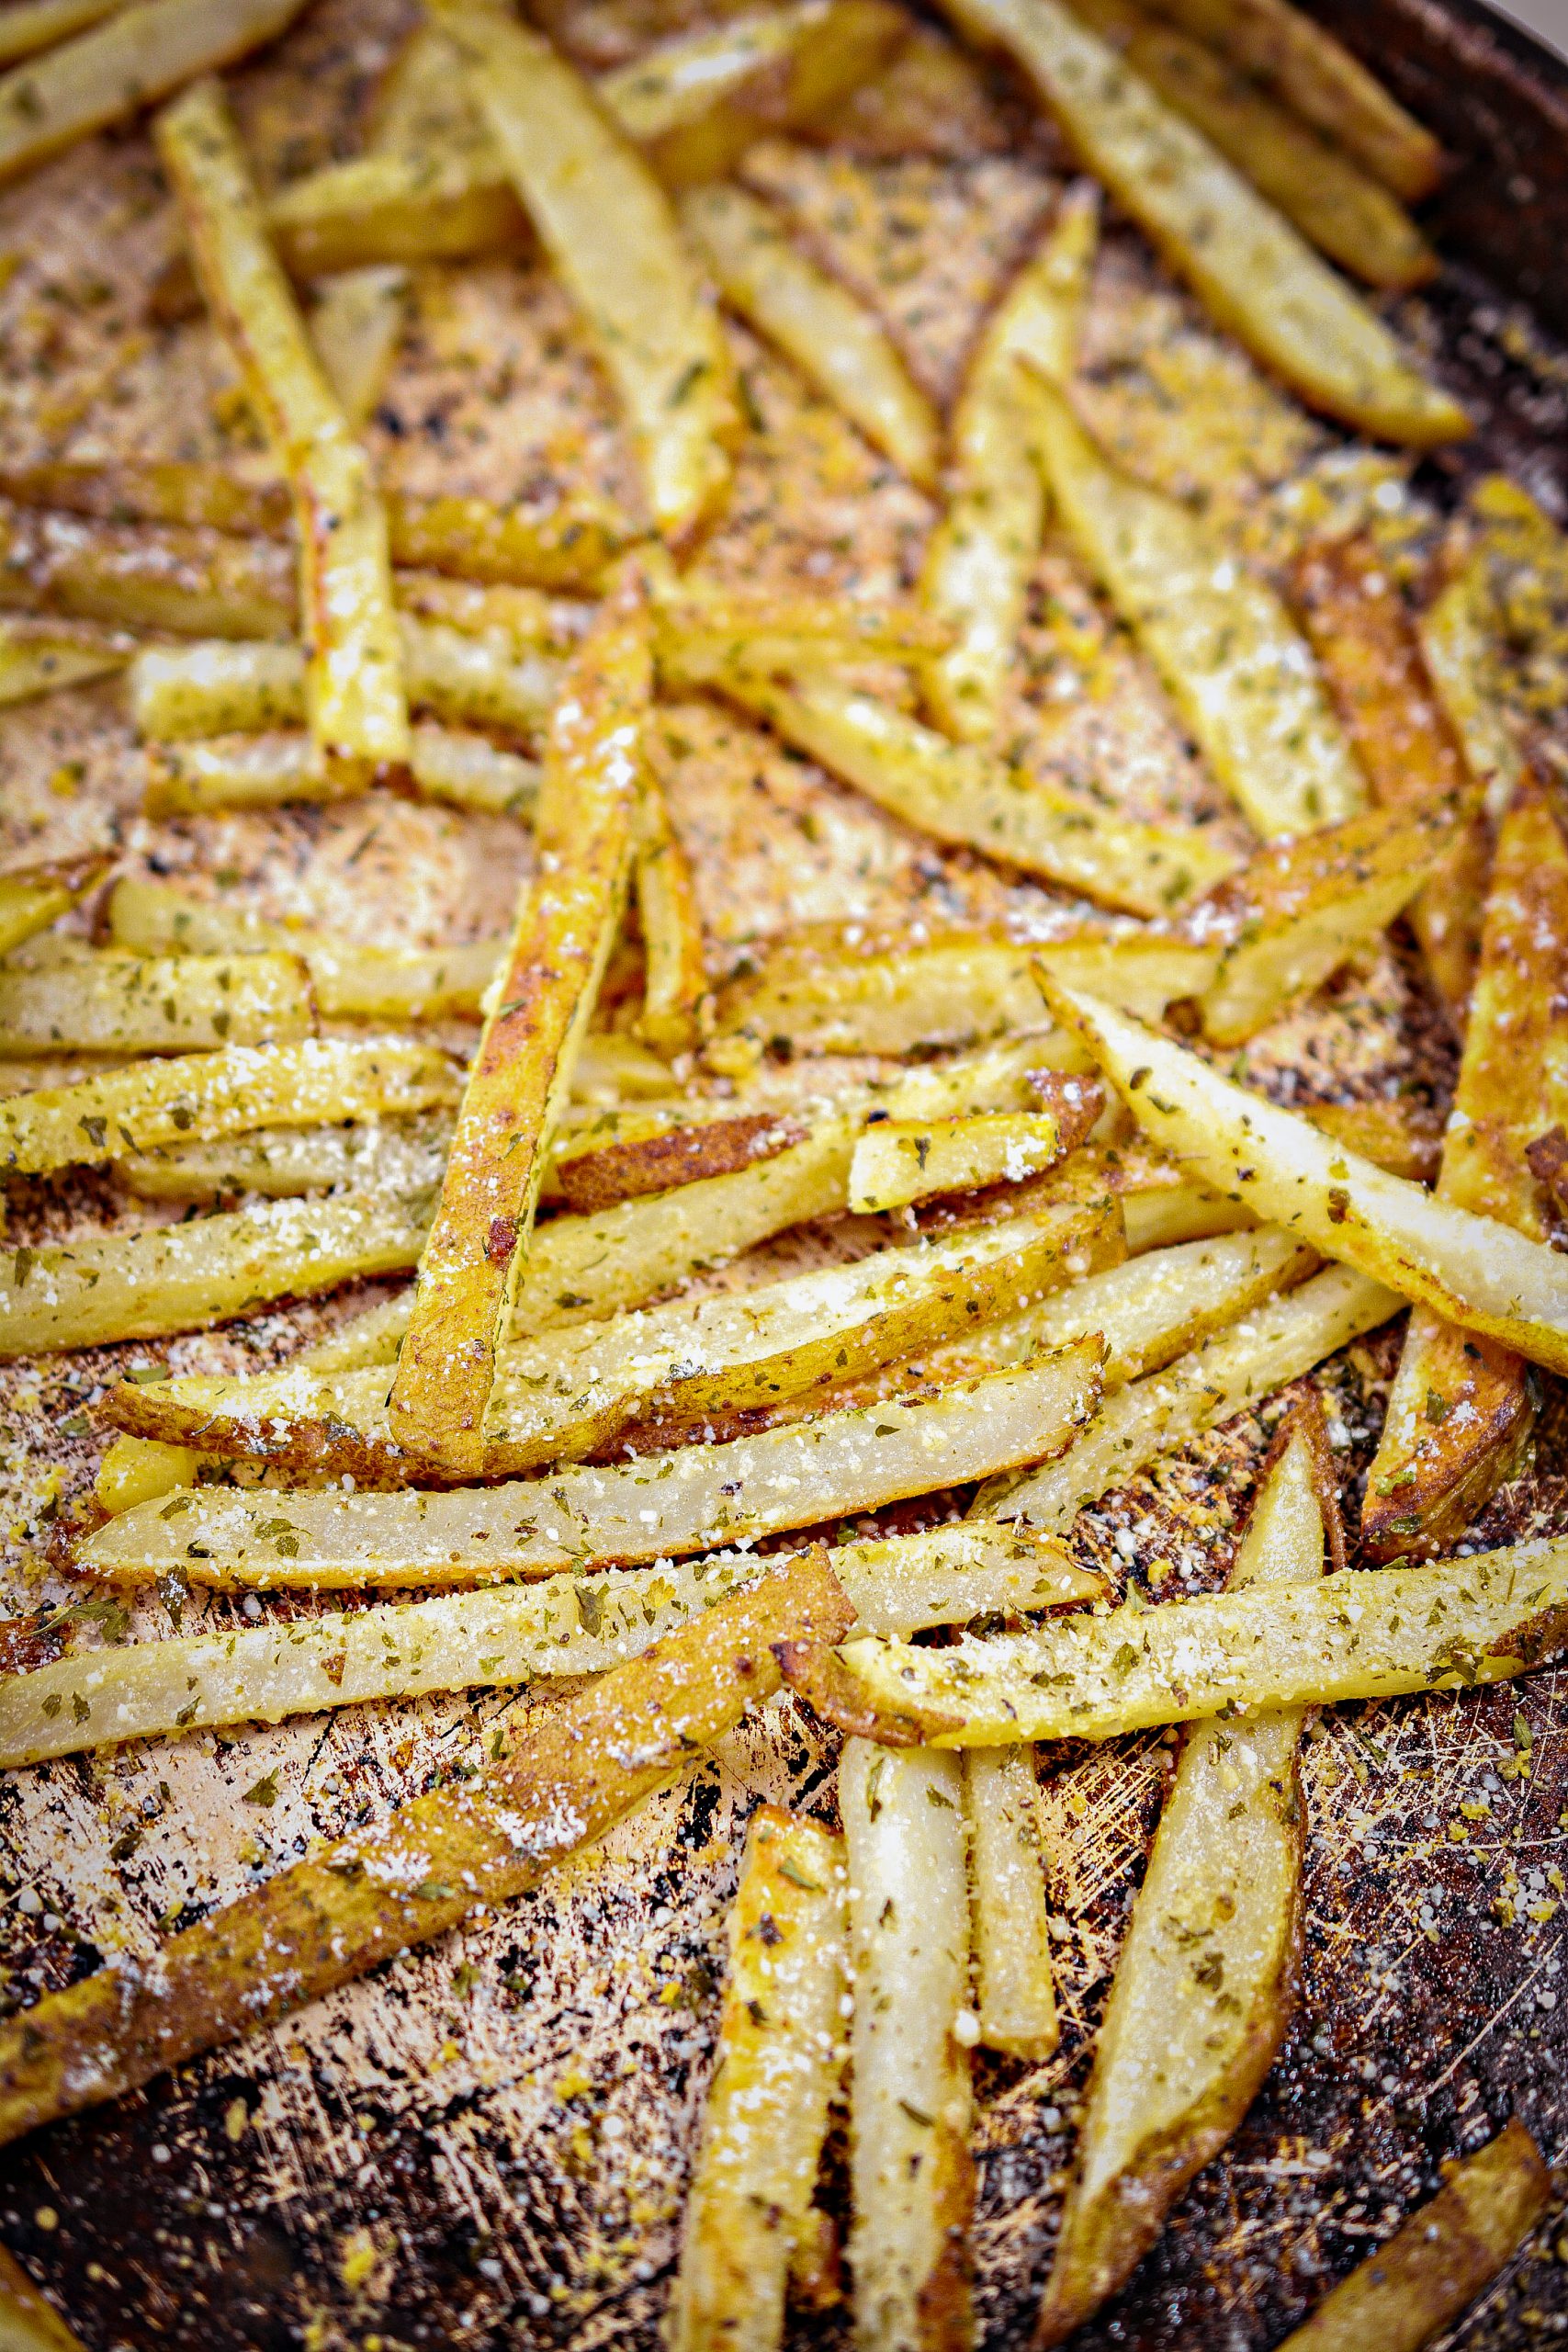 Sprinkle the fries with the parsley flakes and ¼ cup of Parmesan, and toss to coat.